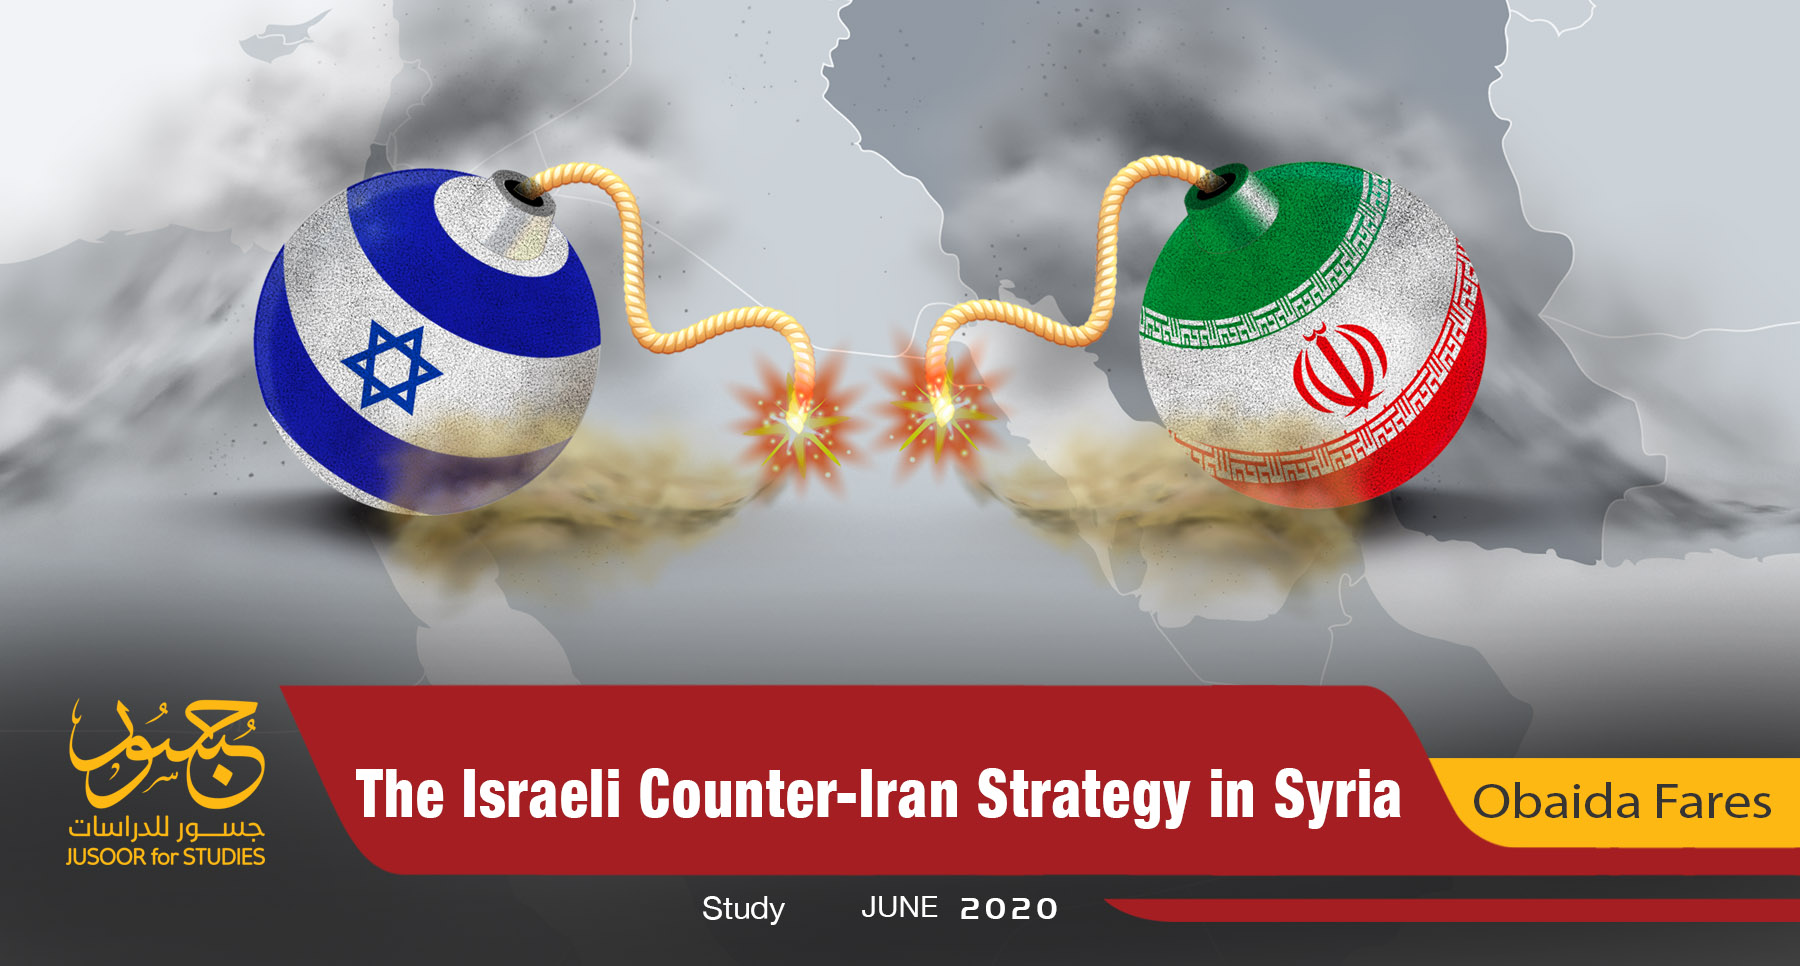 The Israeli Counter-Iran Strategy in Syria